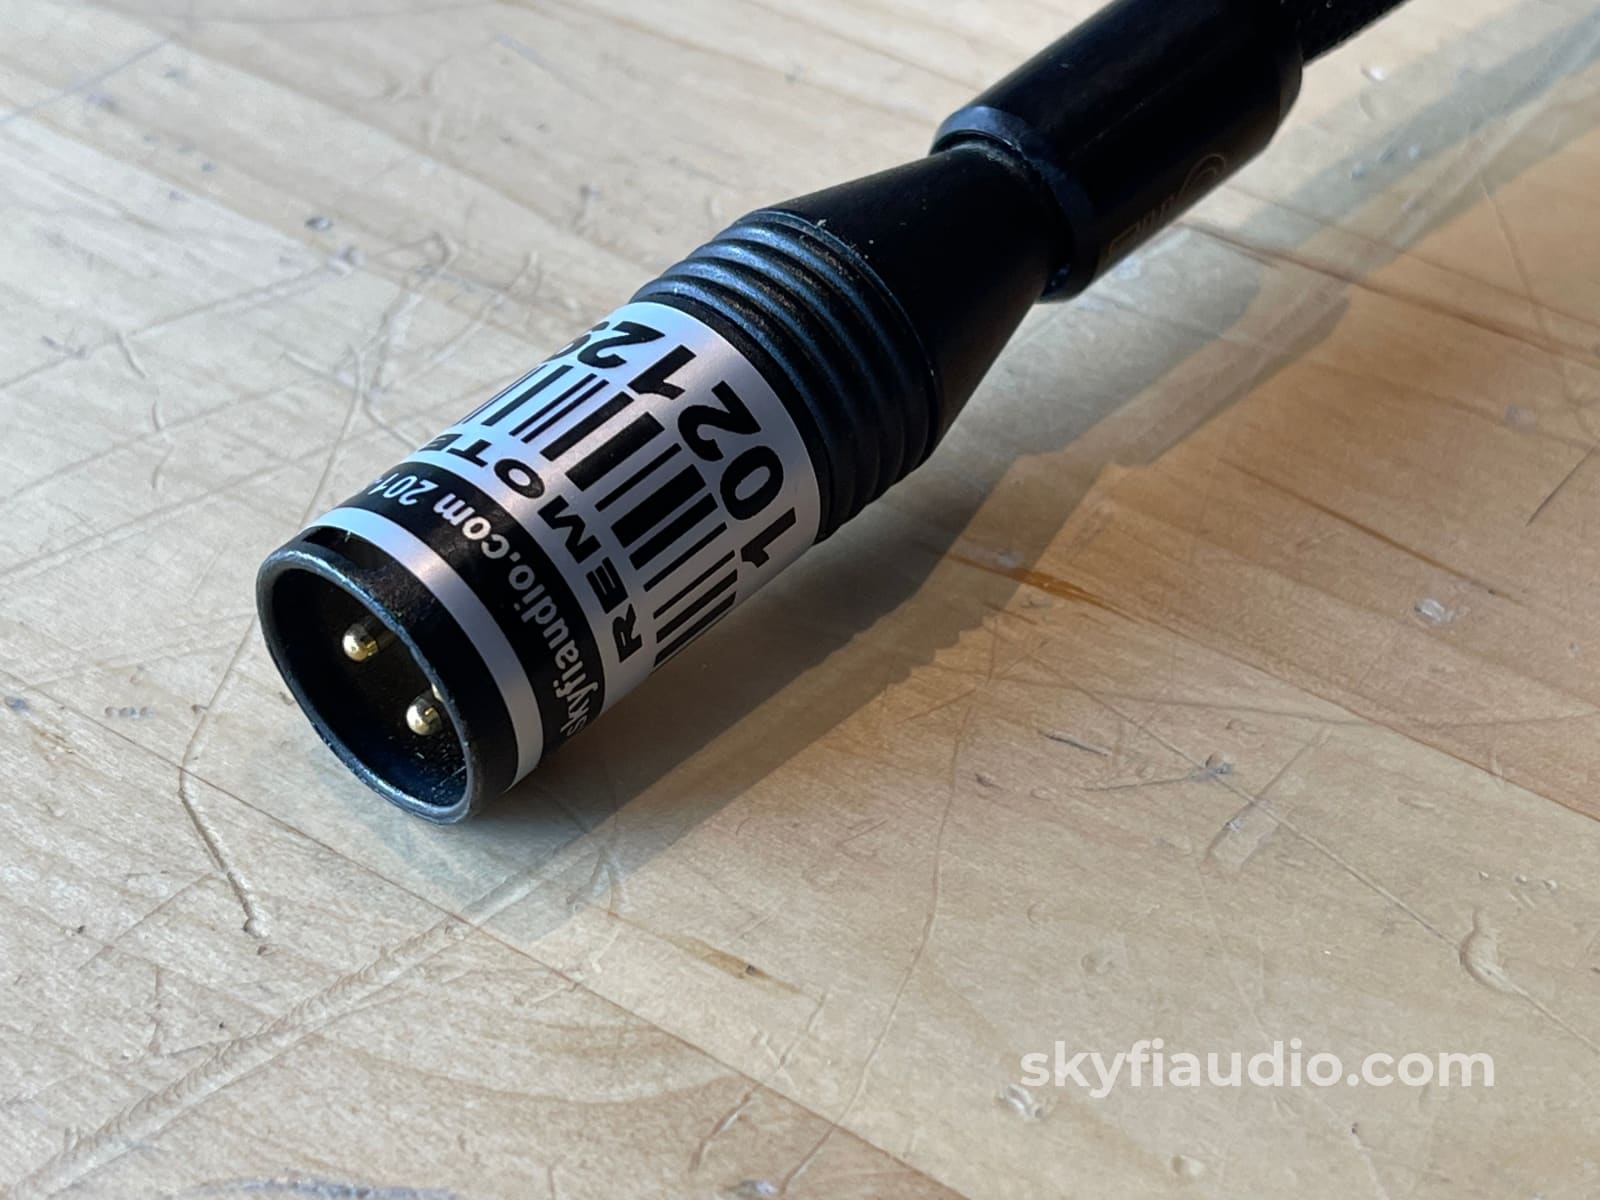 Tara Labs The One Digital Aes/Ebu Interconnect (Xlr) With Isolated Matrix Ground Station - 1M Cables